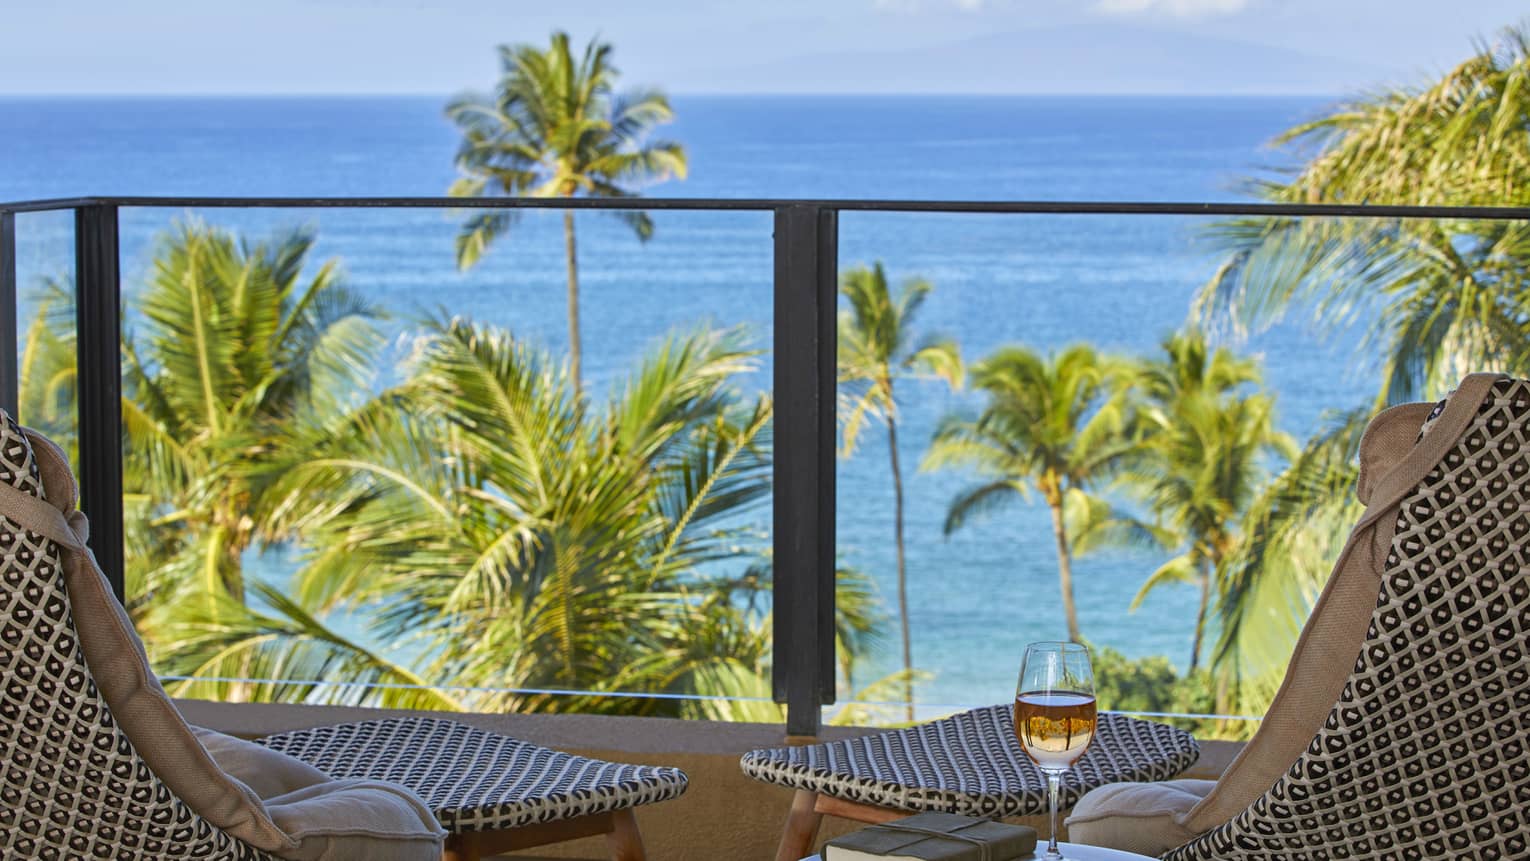 Balcony with rattan chairs, round table with book and glass of wine, overlooking palm trees and blue ocean